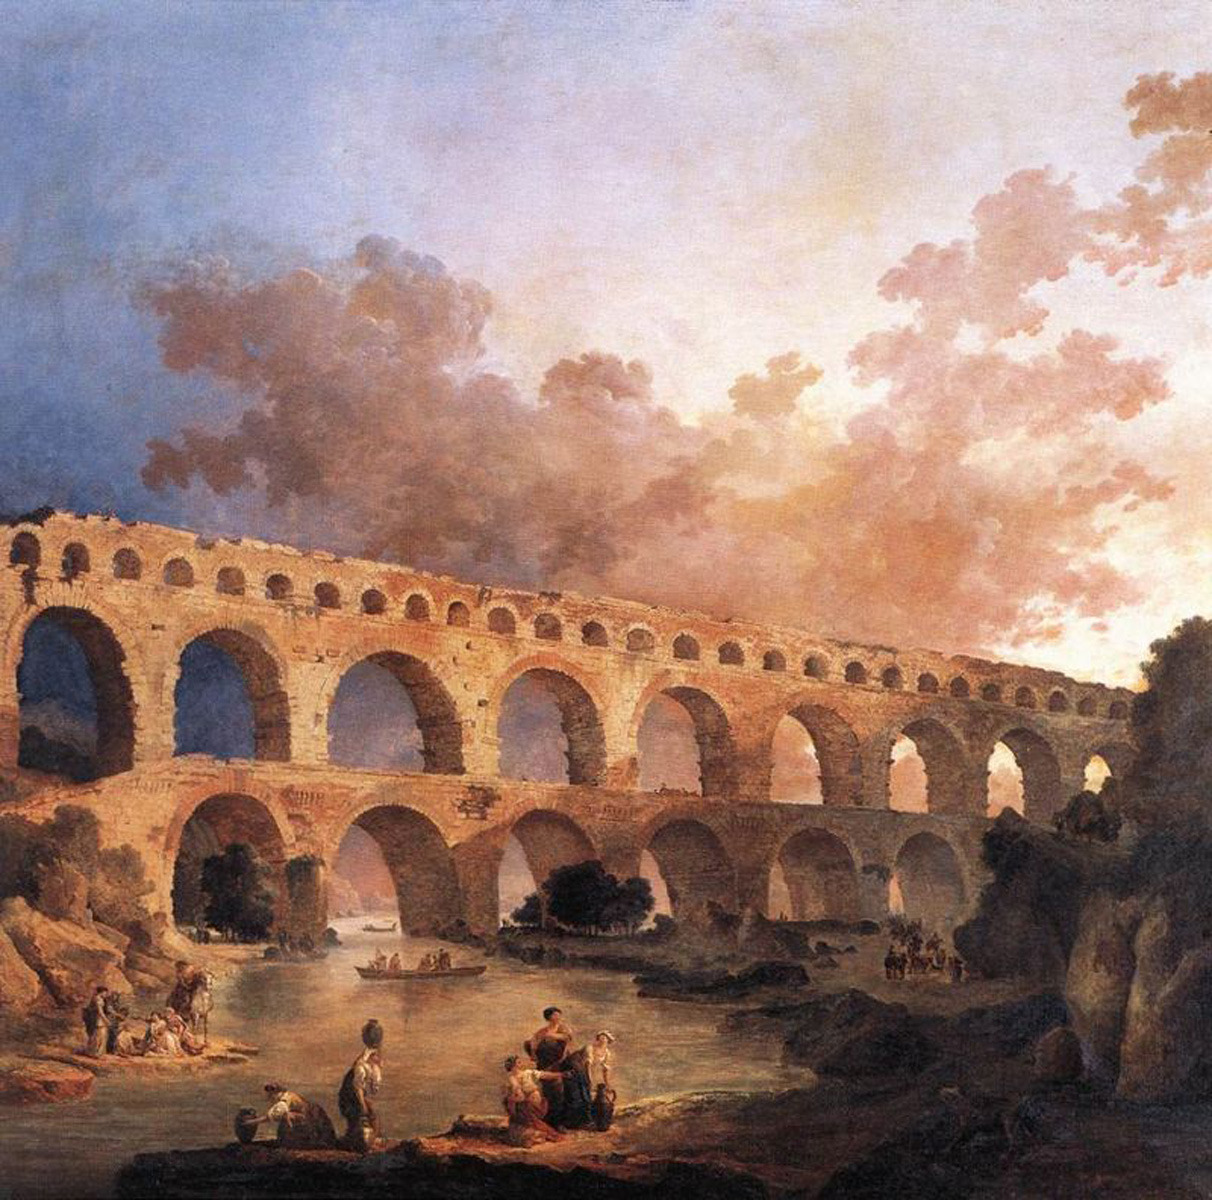 Roman aqueduct of Pont du Gard, now recognized as a UNESCO World Heritage Site. Painting by Hubert Robert 1787.